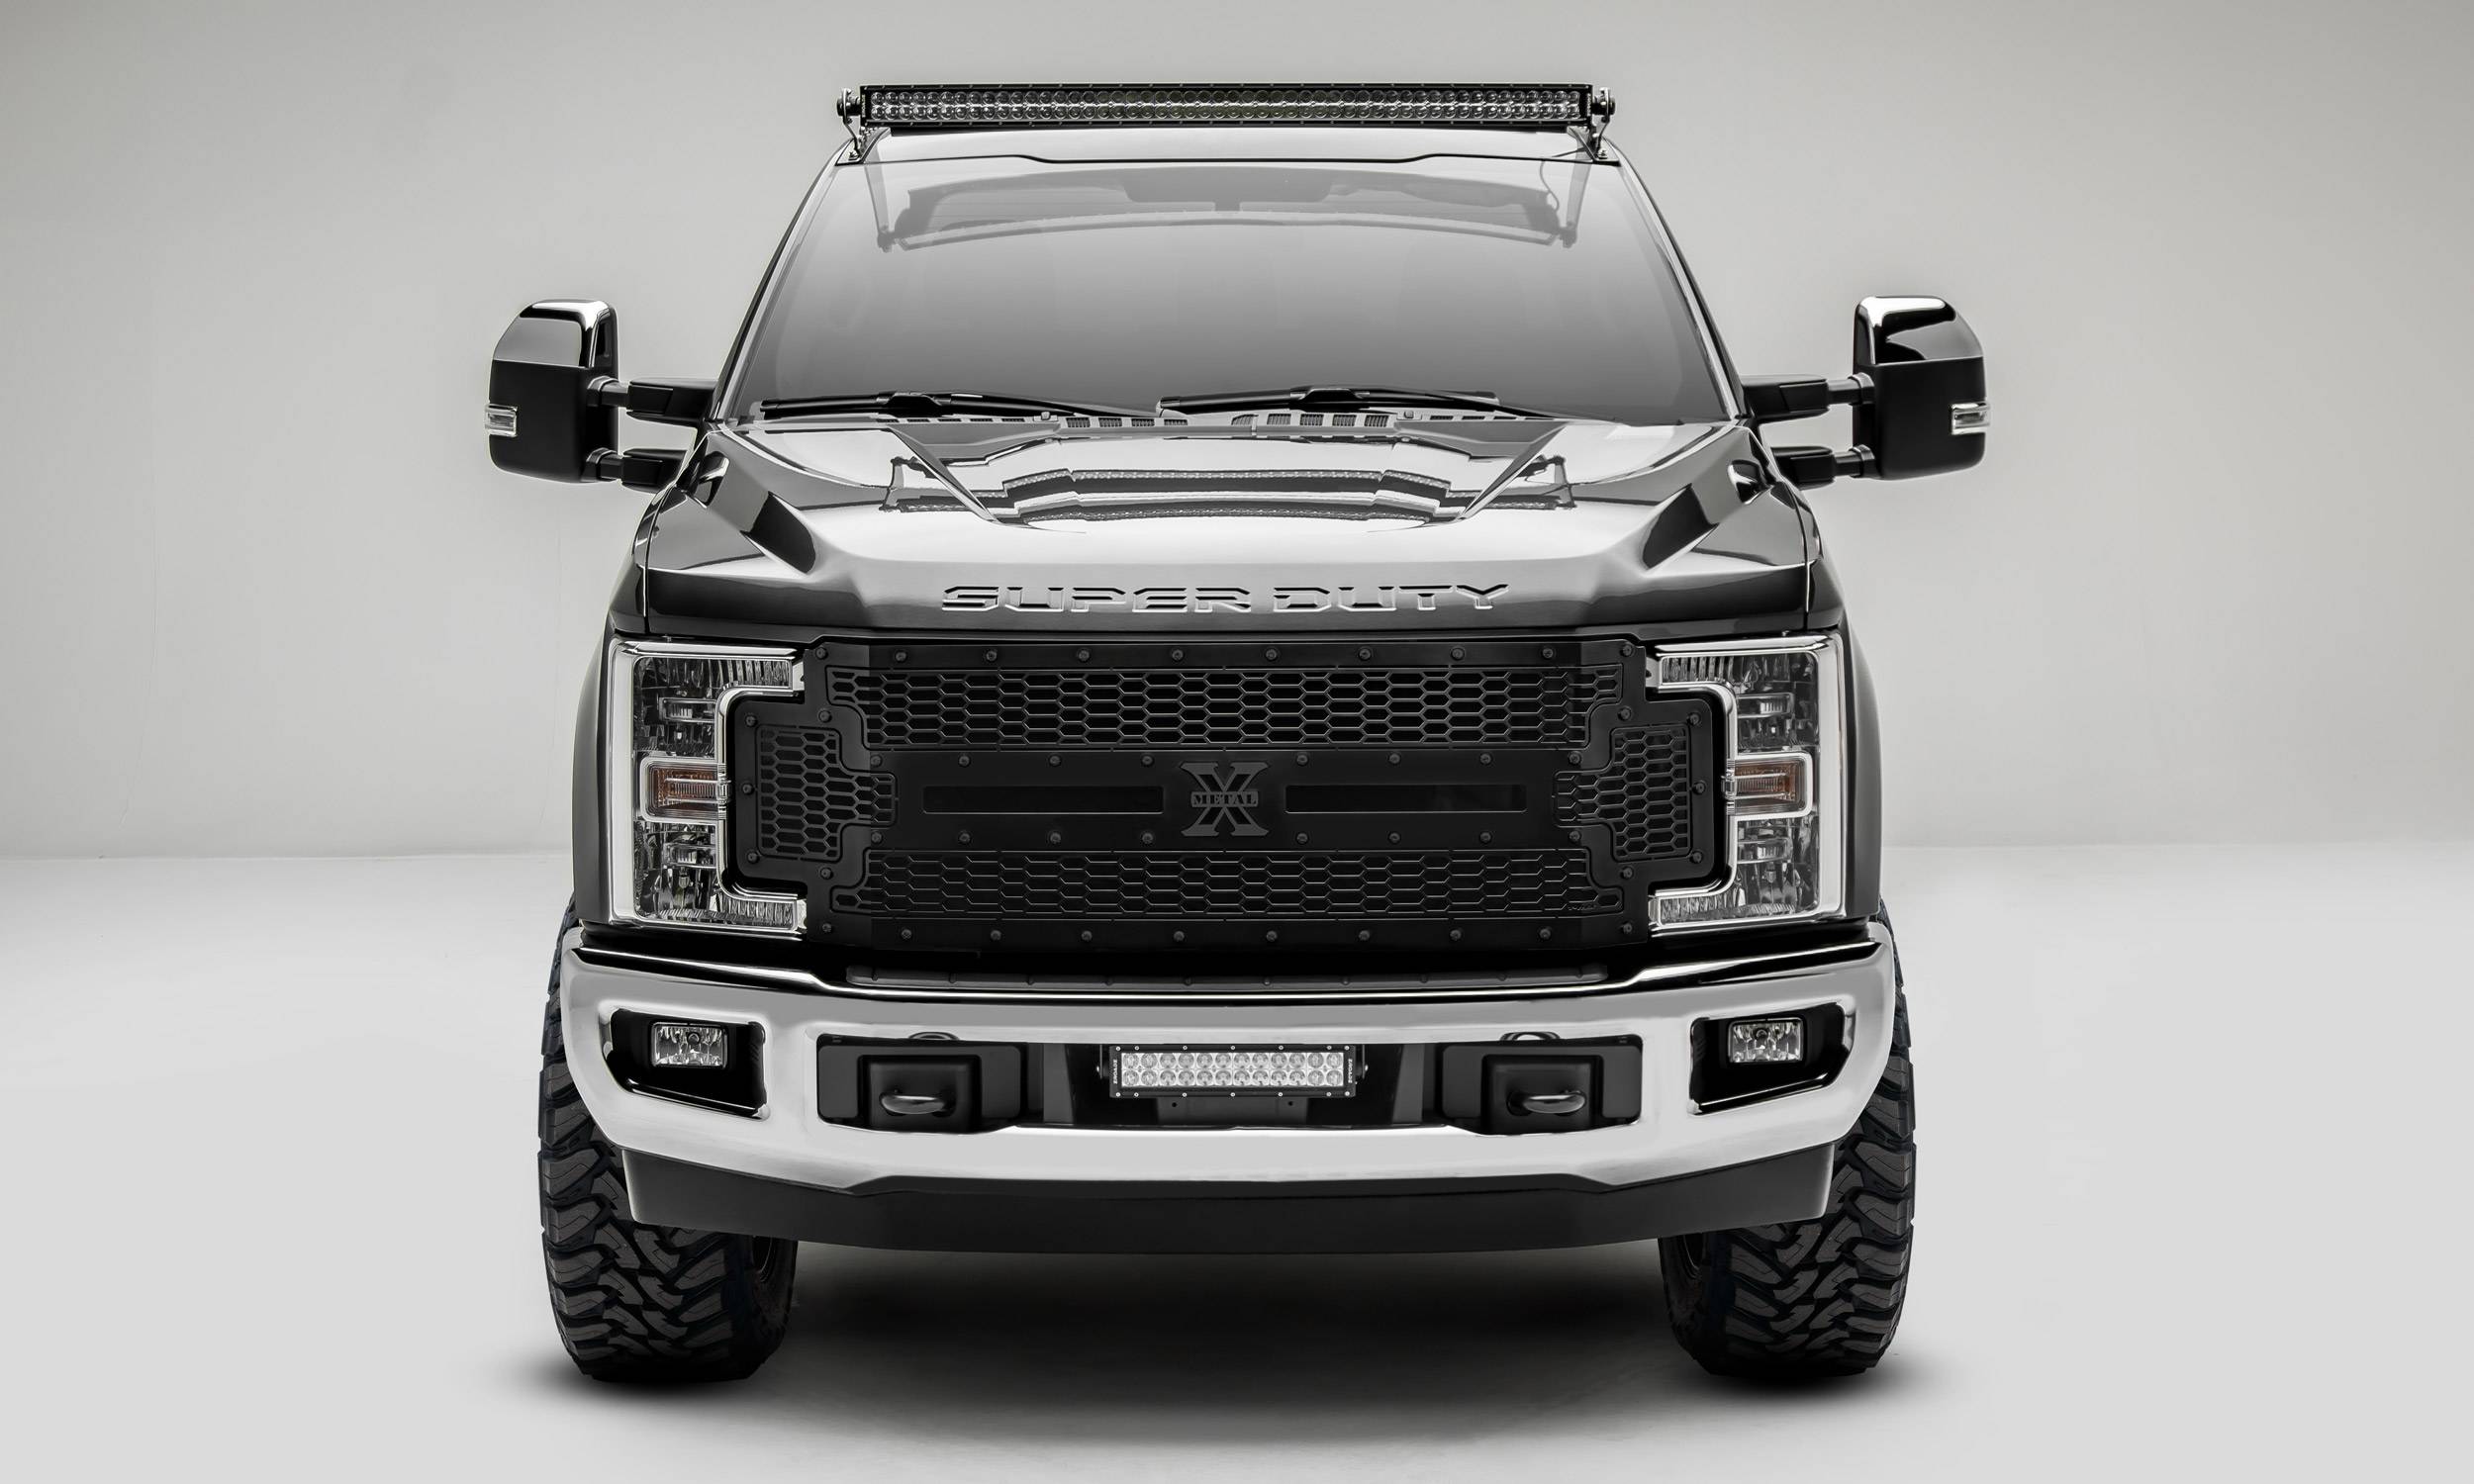 T-REX Grilles - 2017-2019 Super Duty Stealth Laser X Grille, Black, 1 Pc, Replacement, Black Studs, Does Not Fit Vehicles with Camera - Part # 7715471-BR